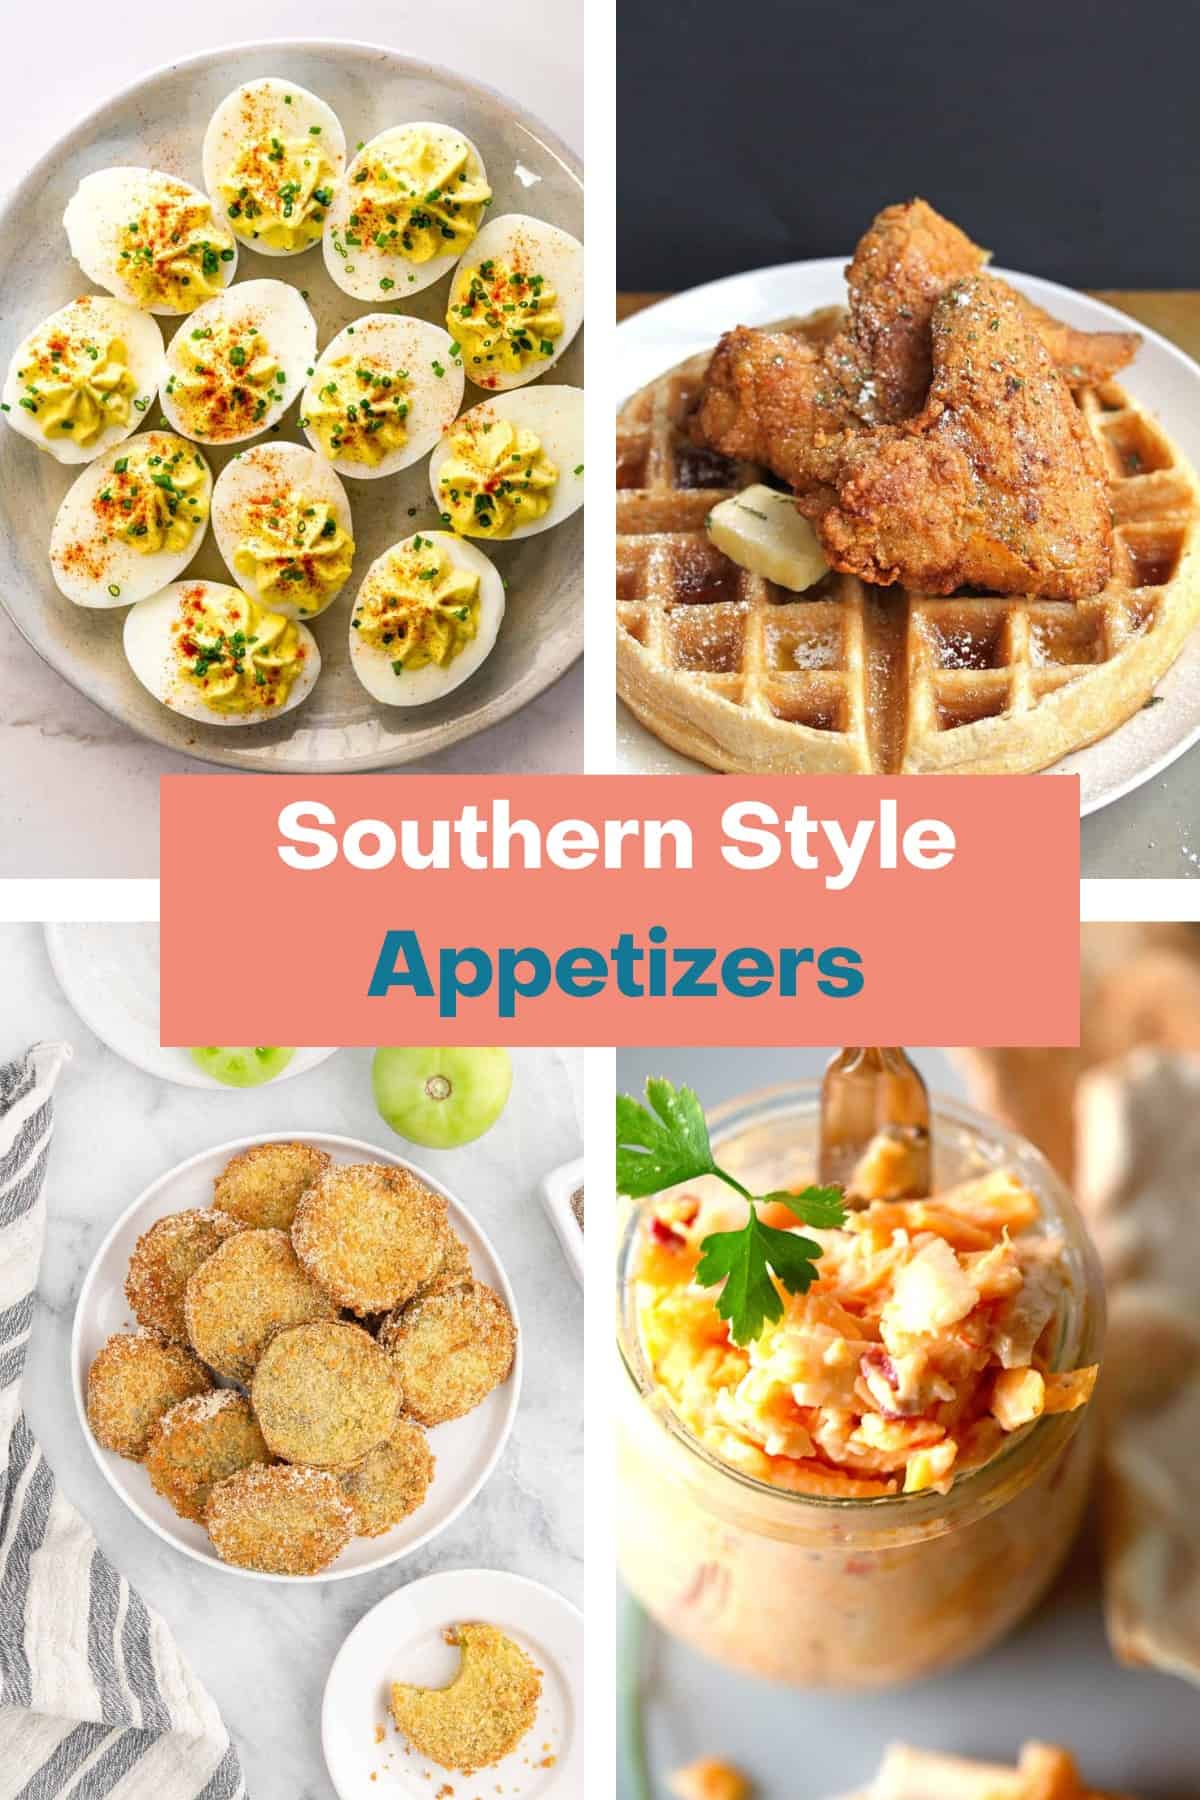 Southern style appetizer graphic